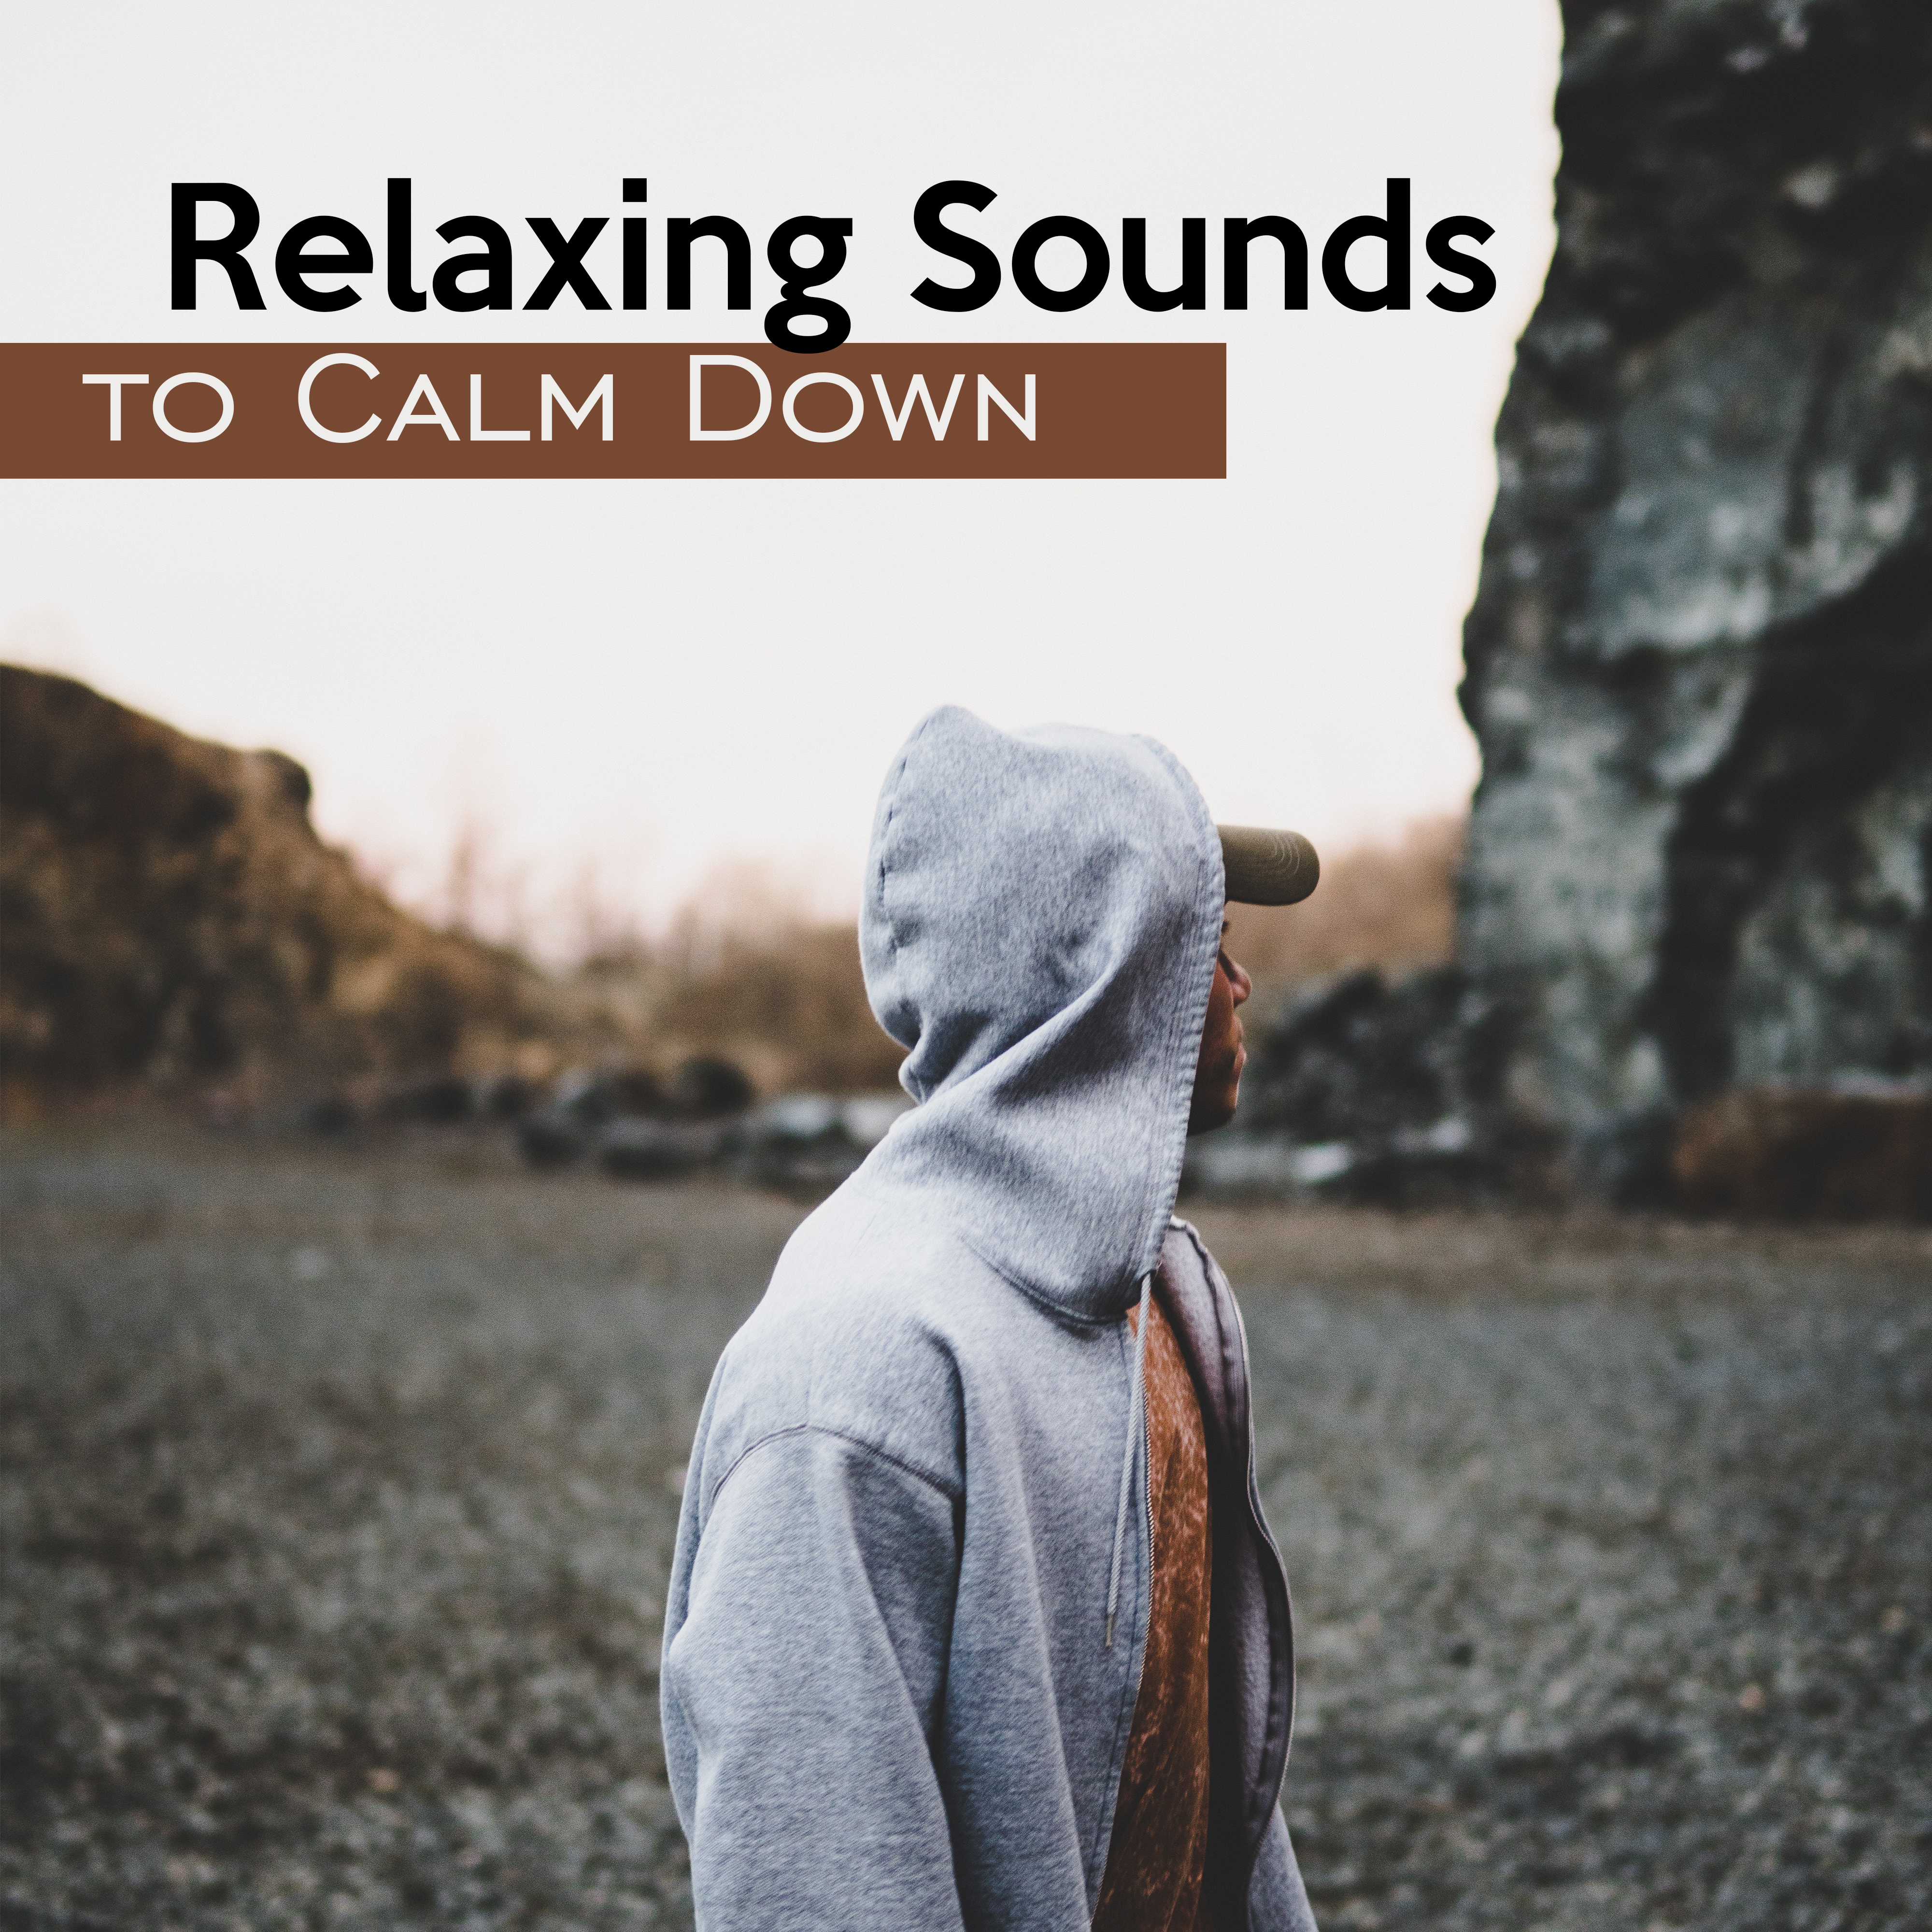 Relaxing Sounds to Calm Down  Healing Music, Peaceful Mind, Rest a Bit, Relaxation Sounds